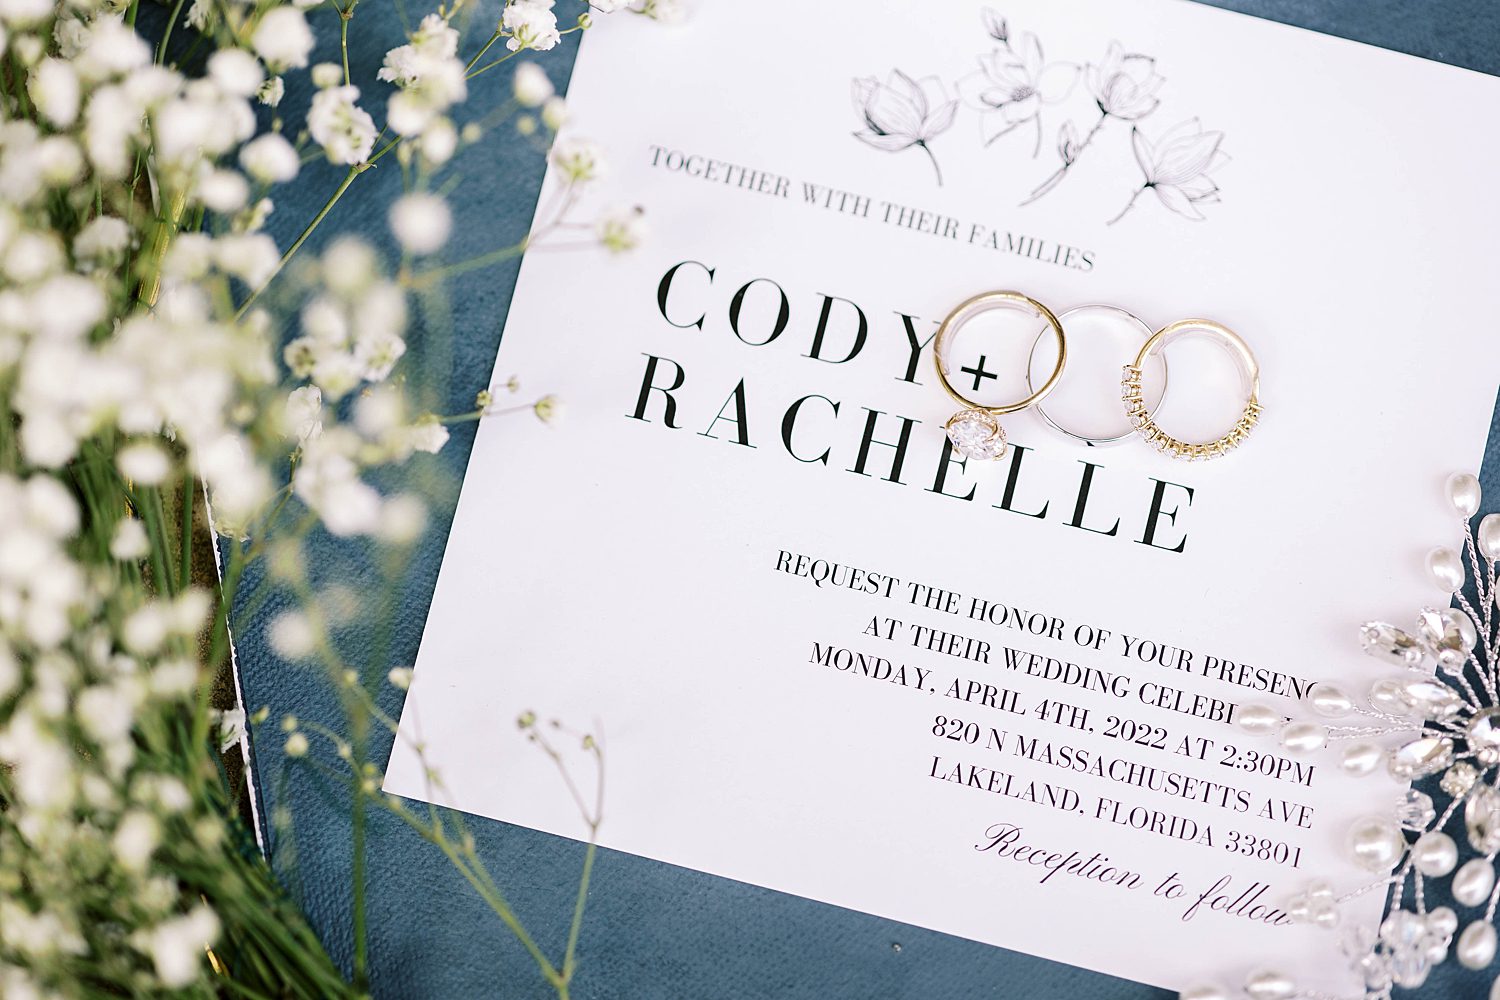 gold wedding bands rest on invitation suite for Haus 820 wedding